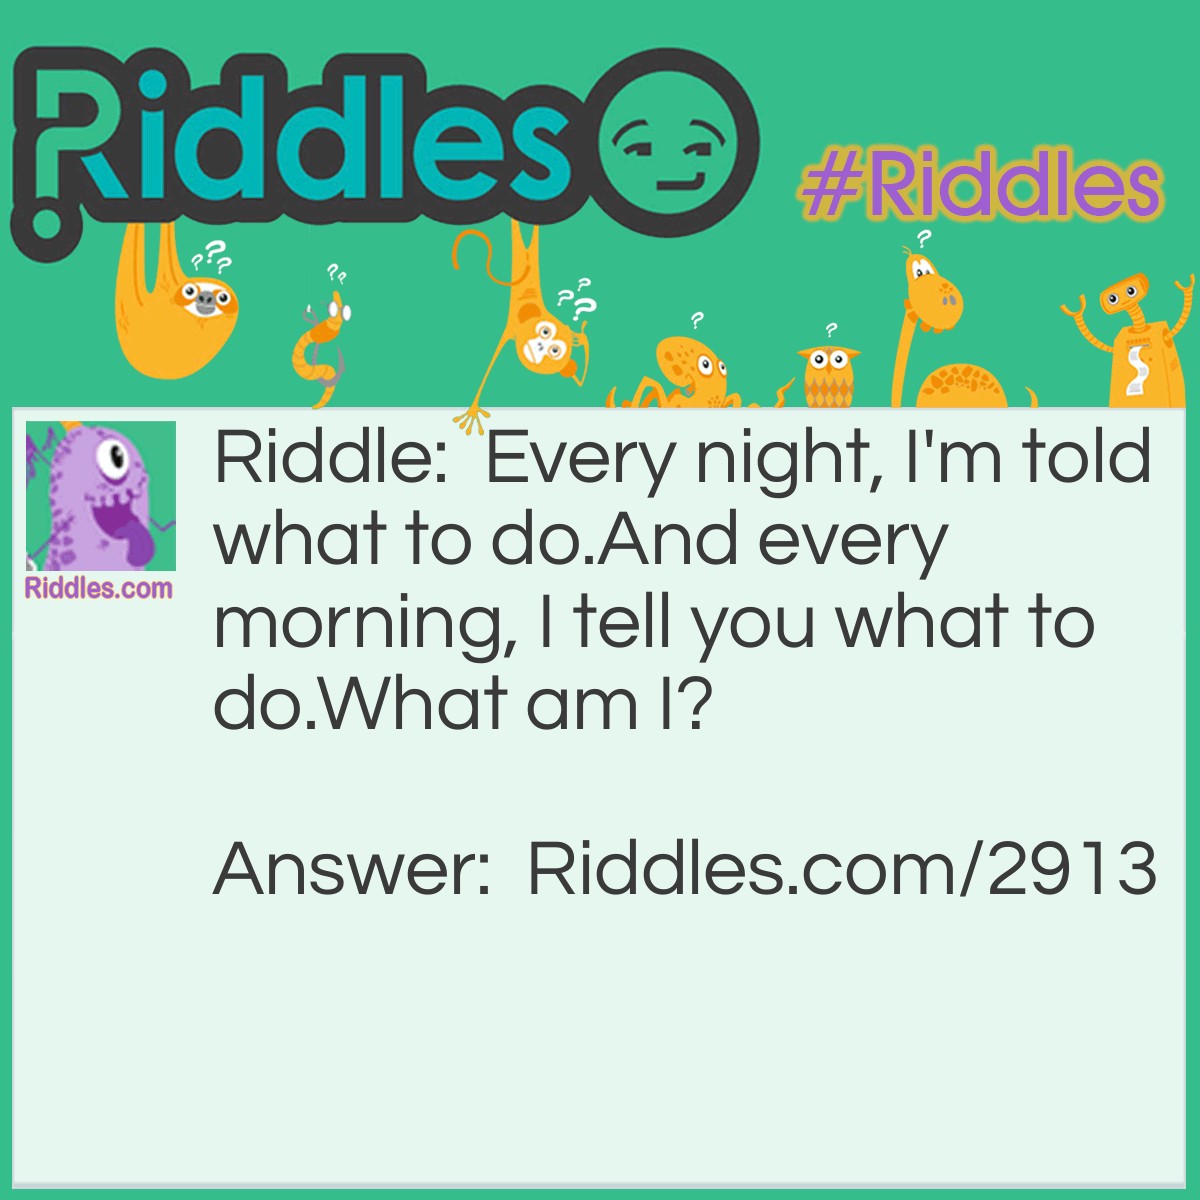 Riddle: Every night, I'm told what to do. And every morning, I do what you tell me to do. But you still get mad at me and hit me. What am I? Answer: An alarm clock.